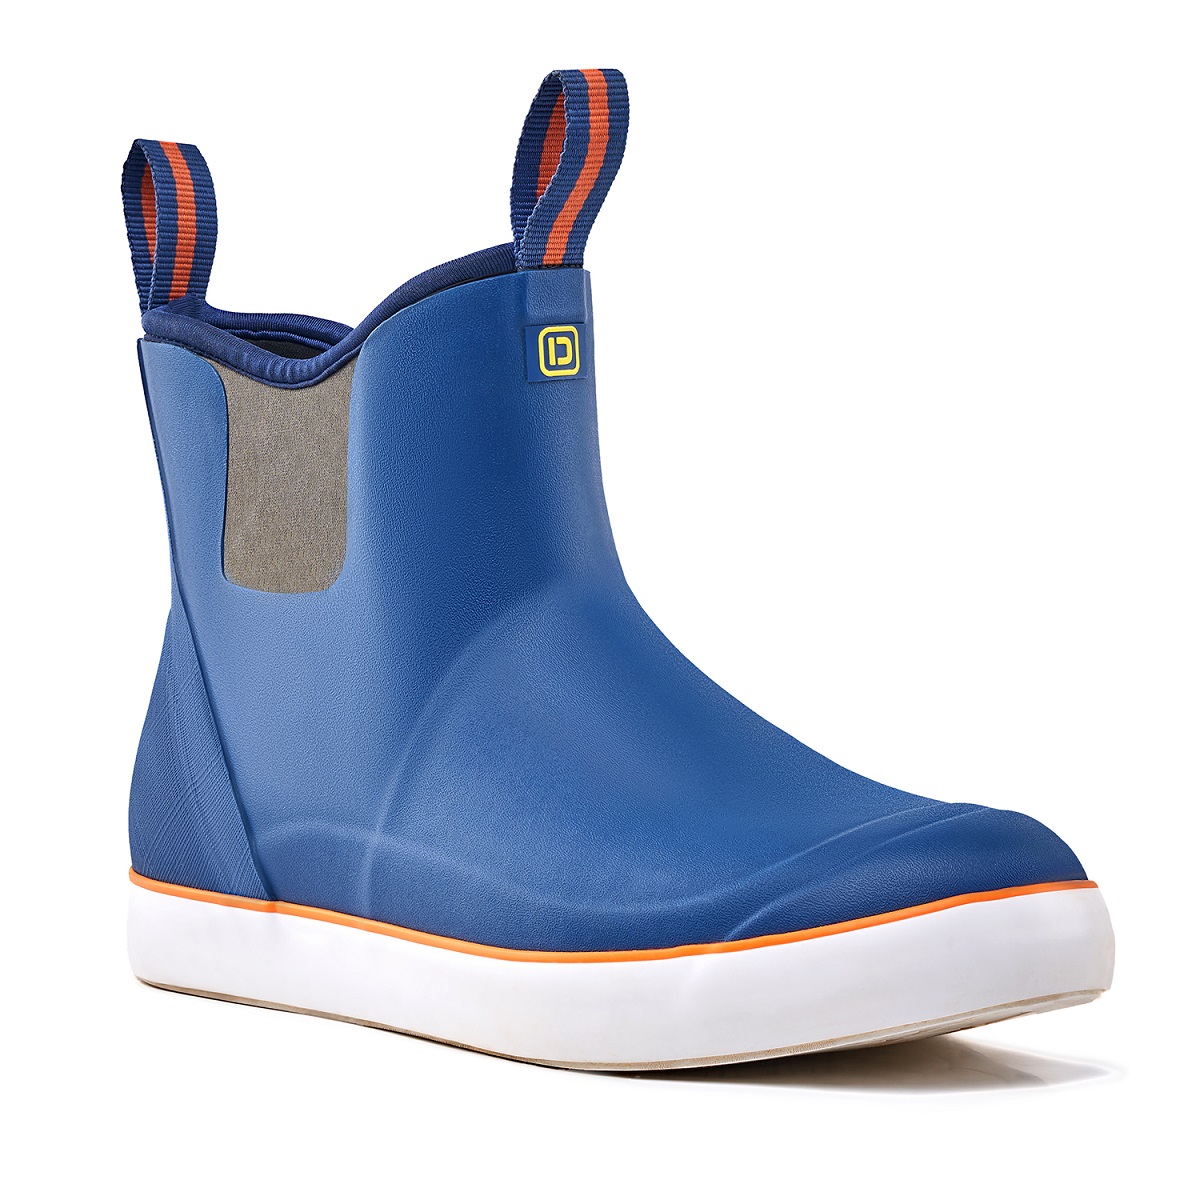 https://img-va.myshopline.com/image/store/1691119653301/DRYCODE-Deck-Boots-For-Men-(Blue)-Ankle-Rubber-Boots-for-Fishing-Boating-(2)-1.jpeg?w=1200&h=1200